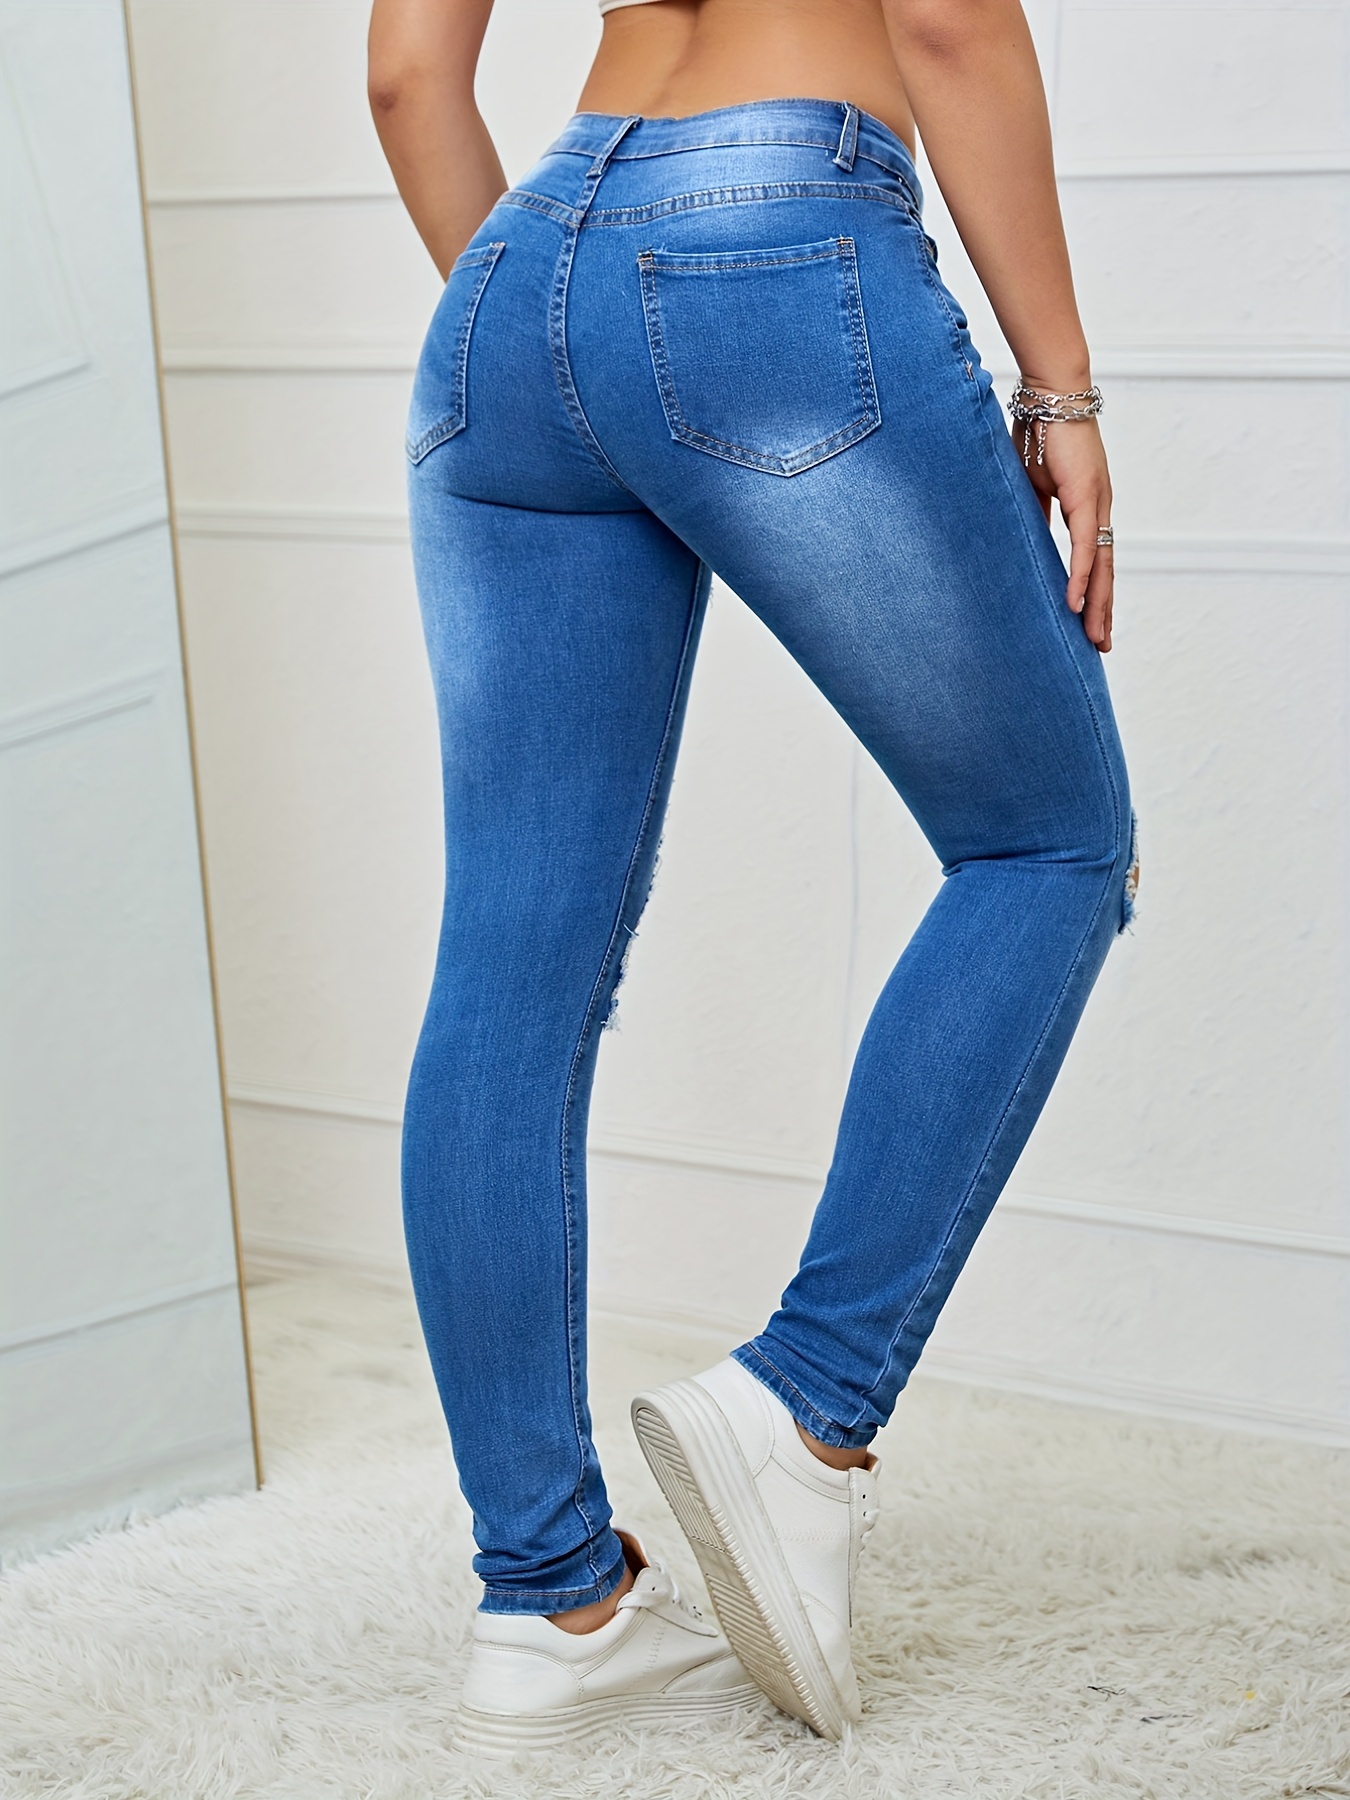 Ripped High * Skinny Jeans, Light Washed Blue Stretchy Sexy Distressed  Curvy Denim Pants, Women's Denim Jeans & Clothing